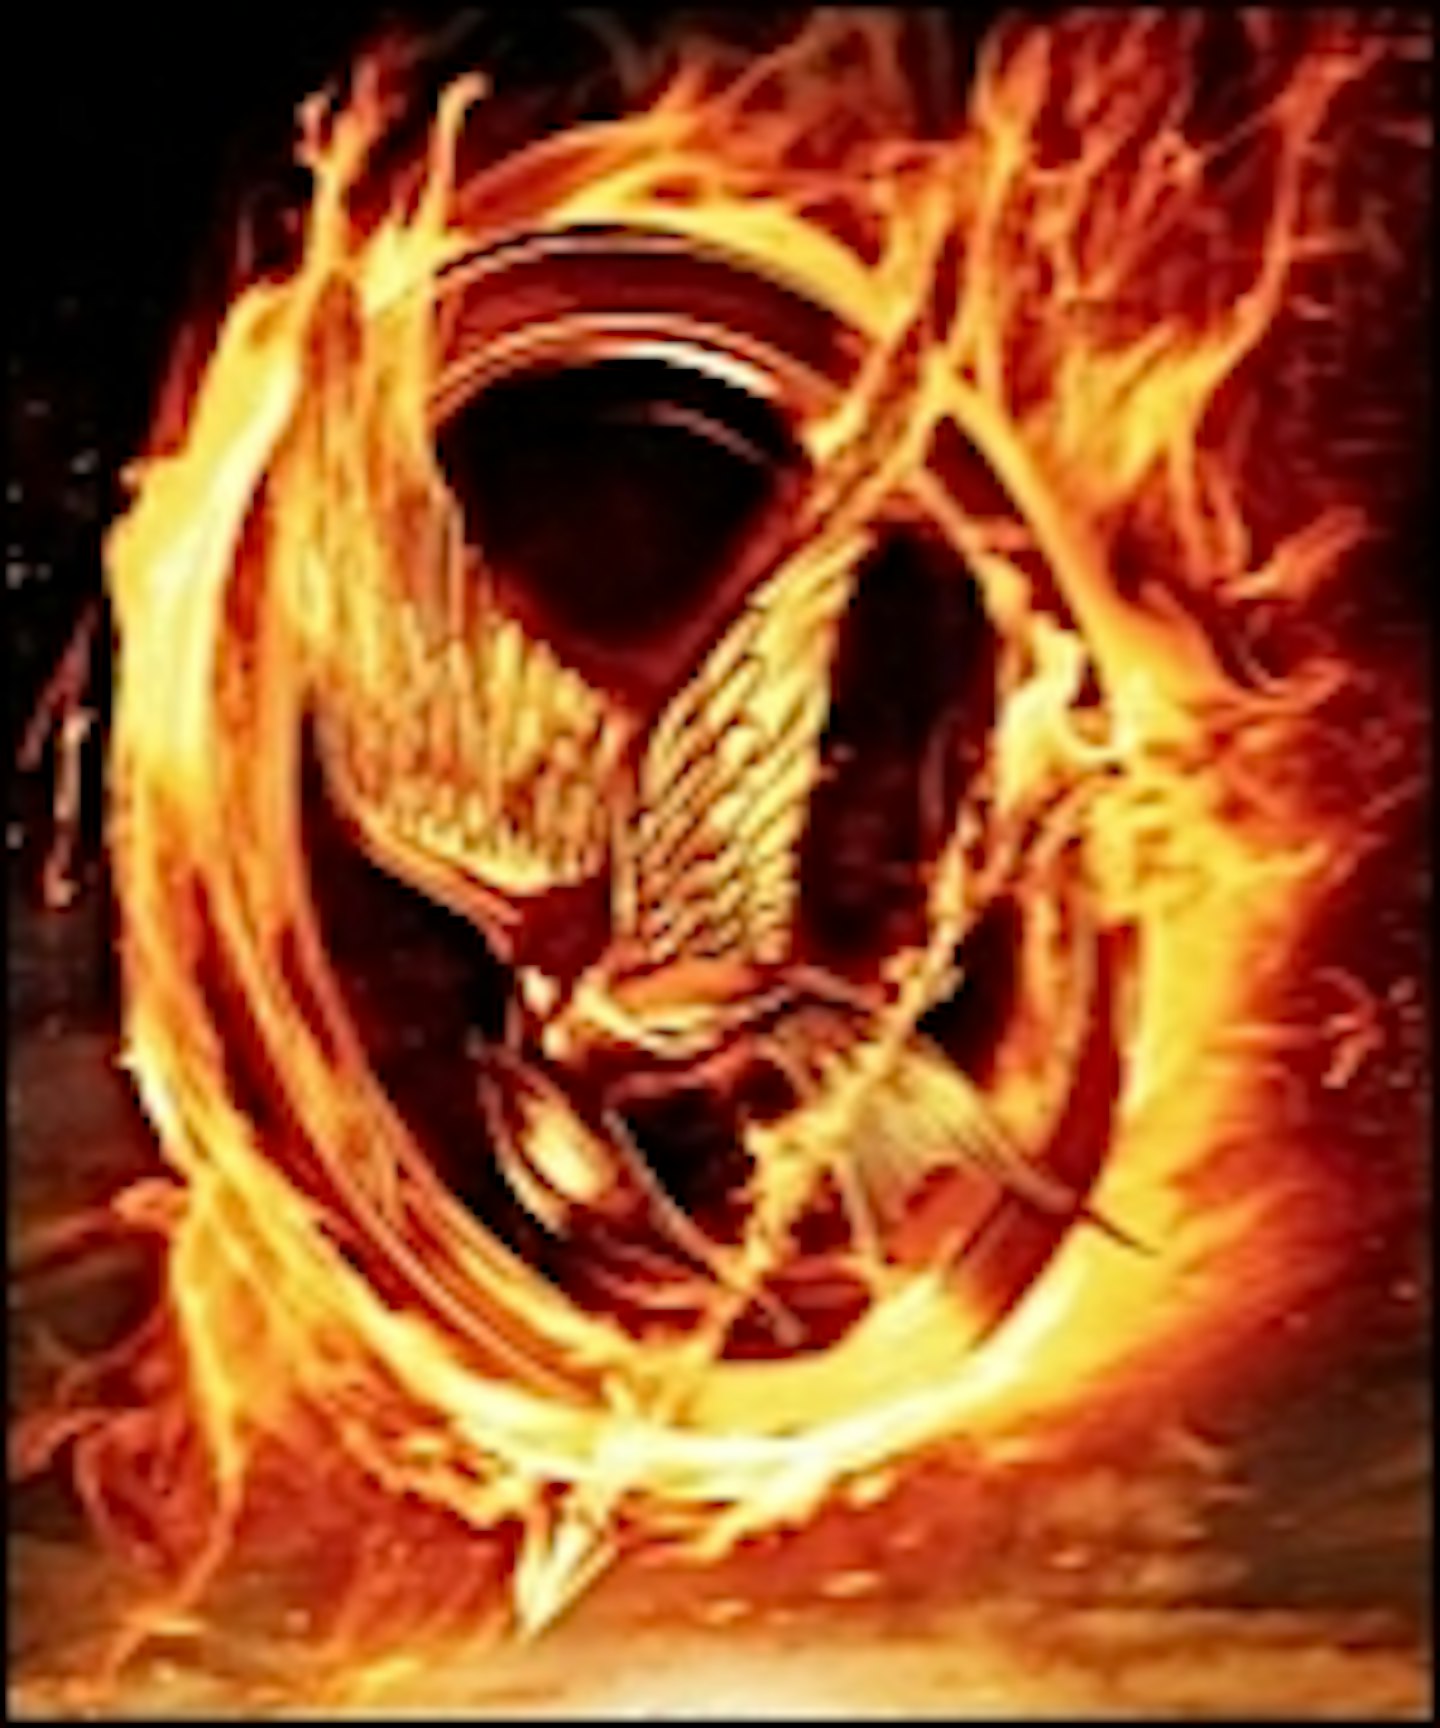 New Hunger Games Poster Is Online